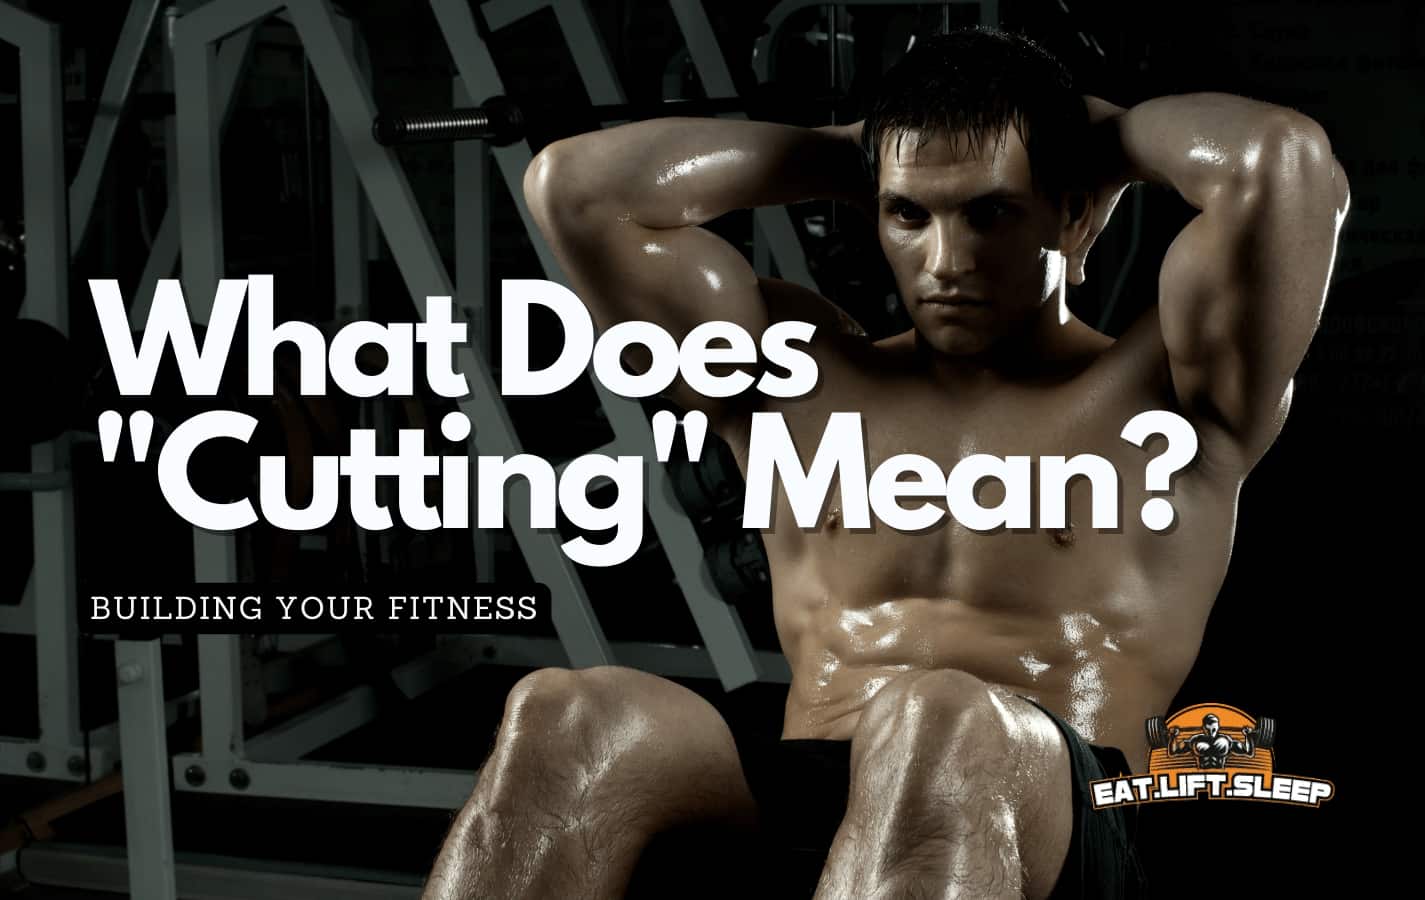 The Power of Cutting: How to Achieve Your Fitness Goals